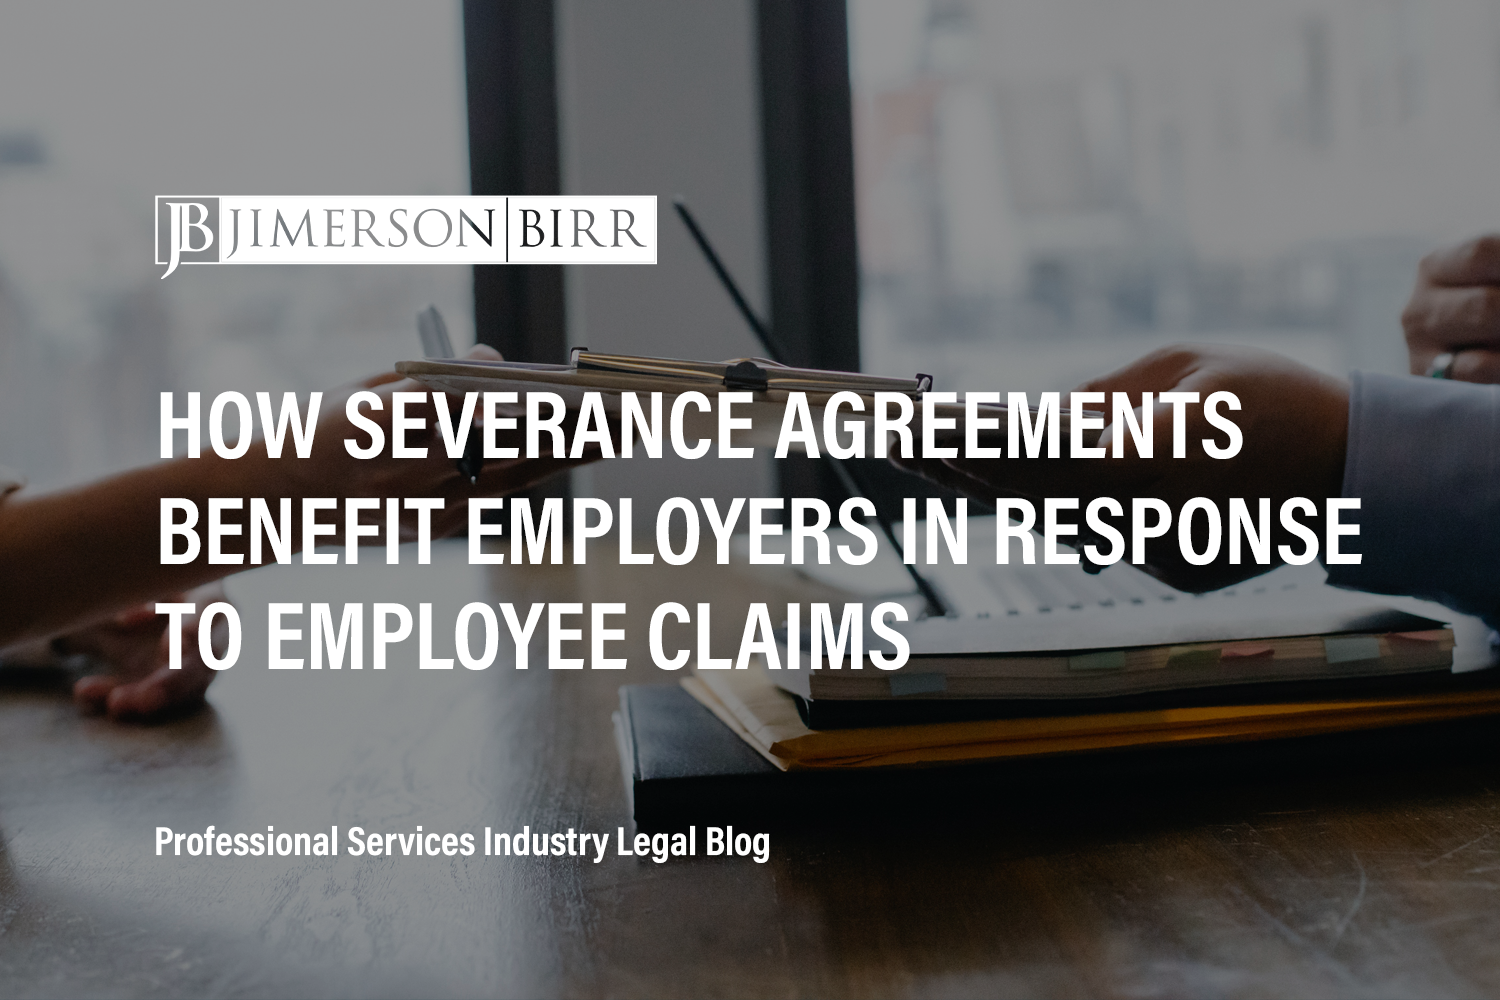 How Severance Agreements Benefit Employers in Response to Employee Claims